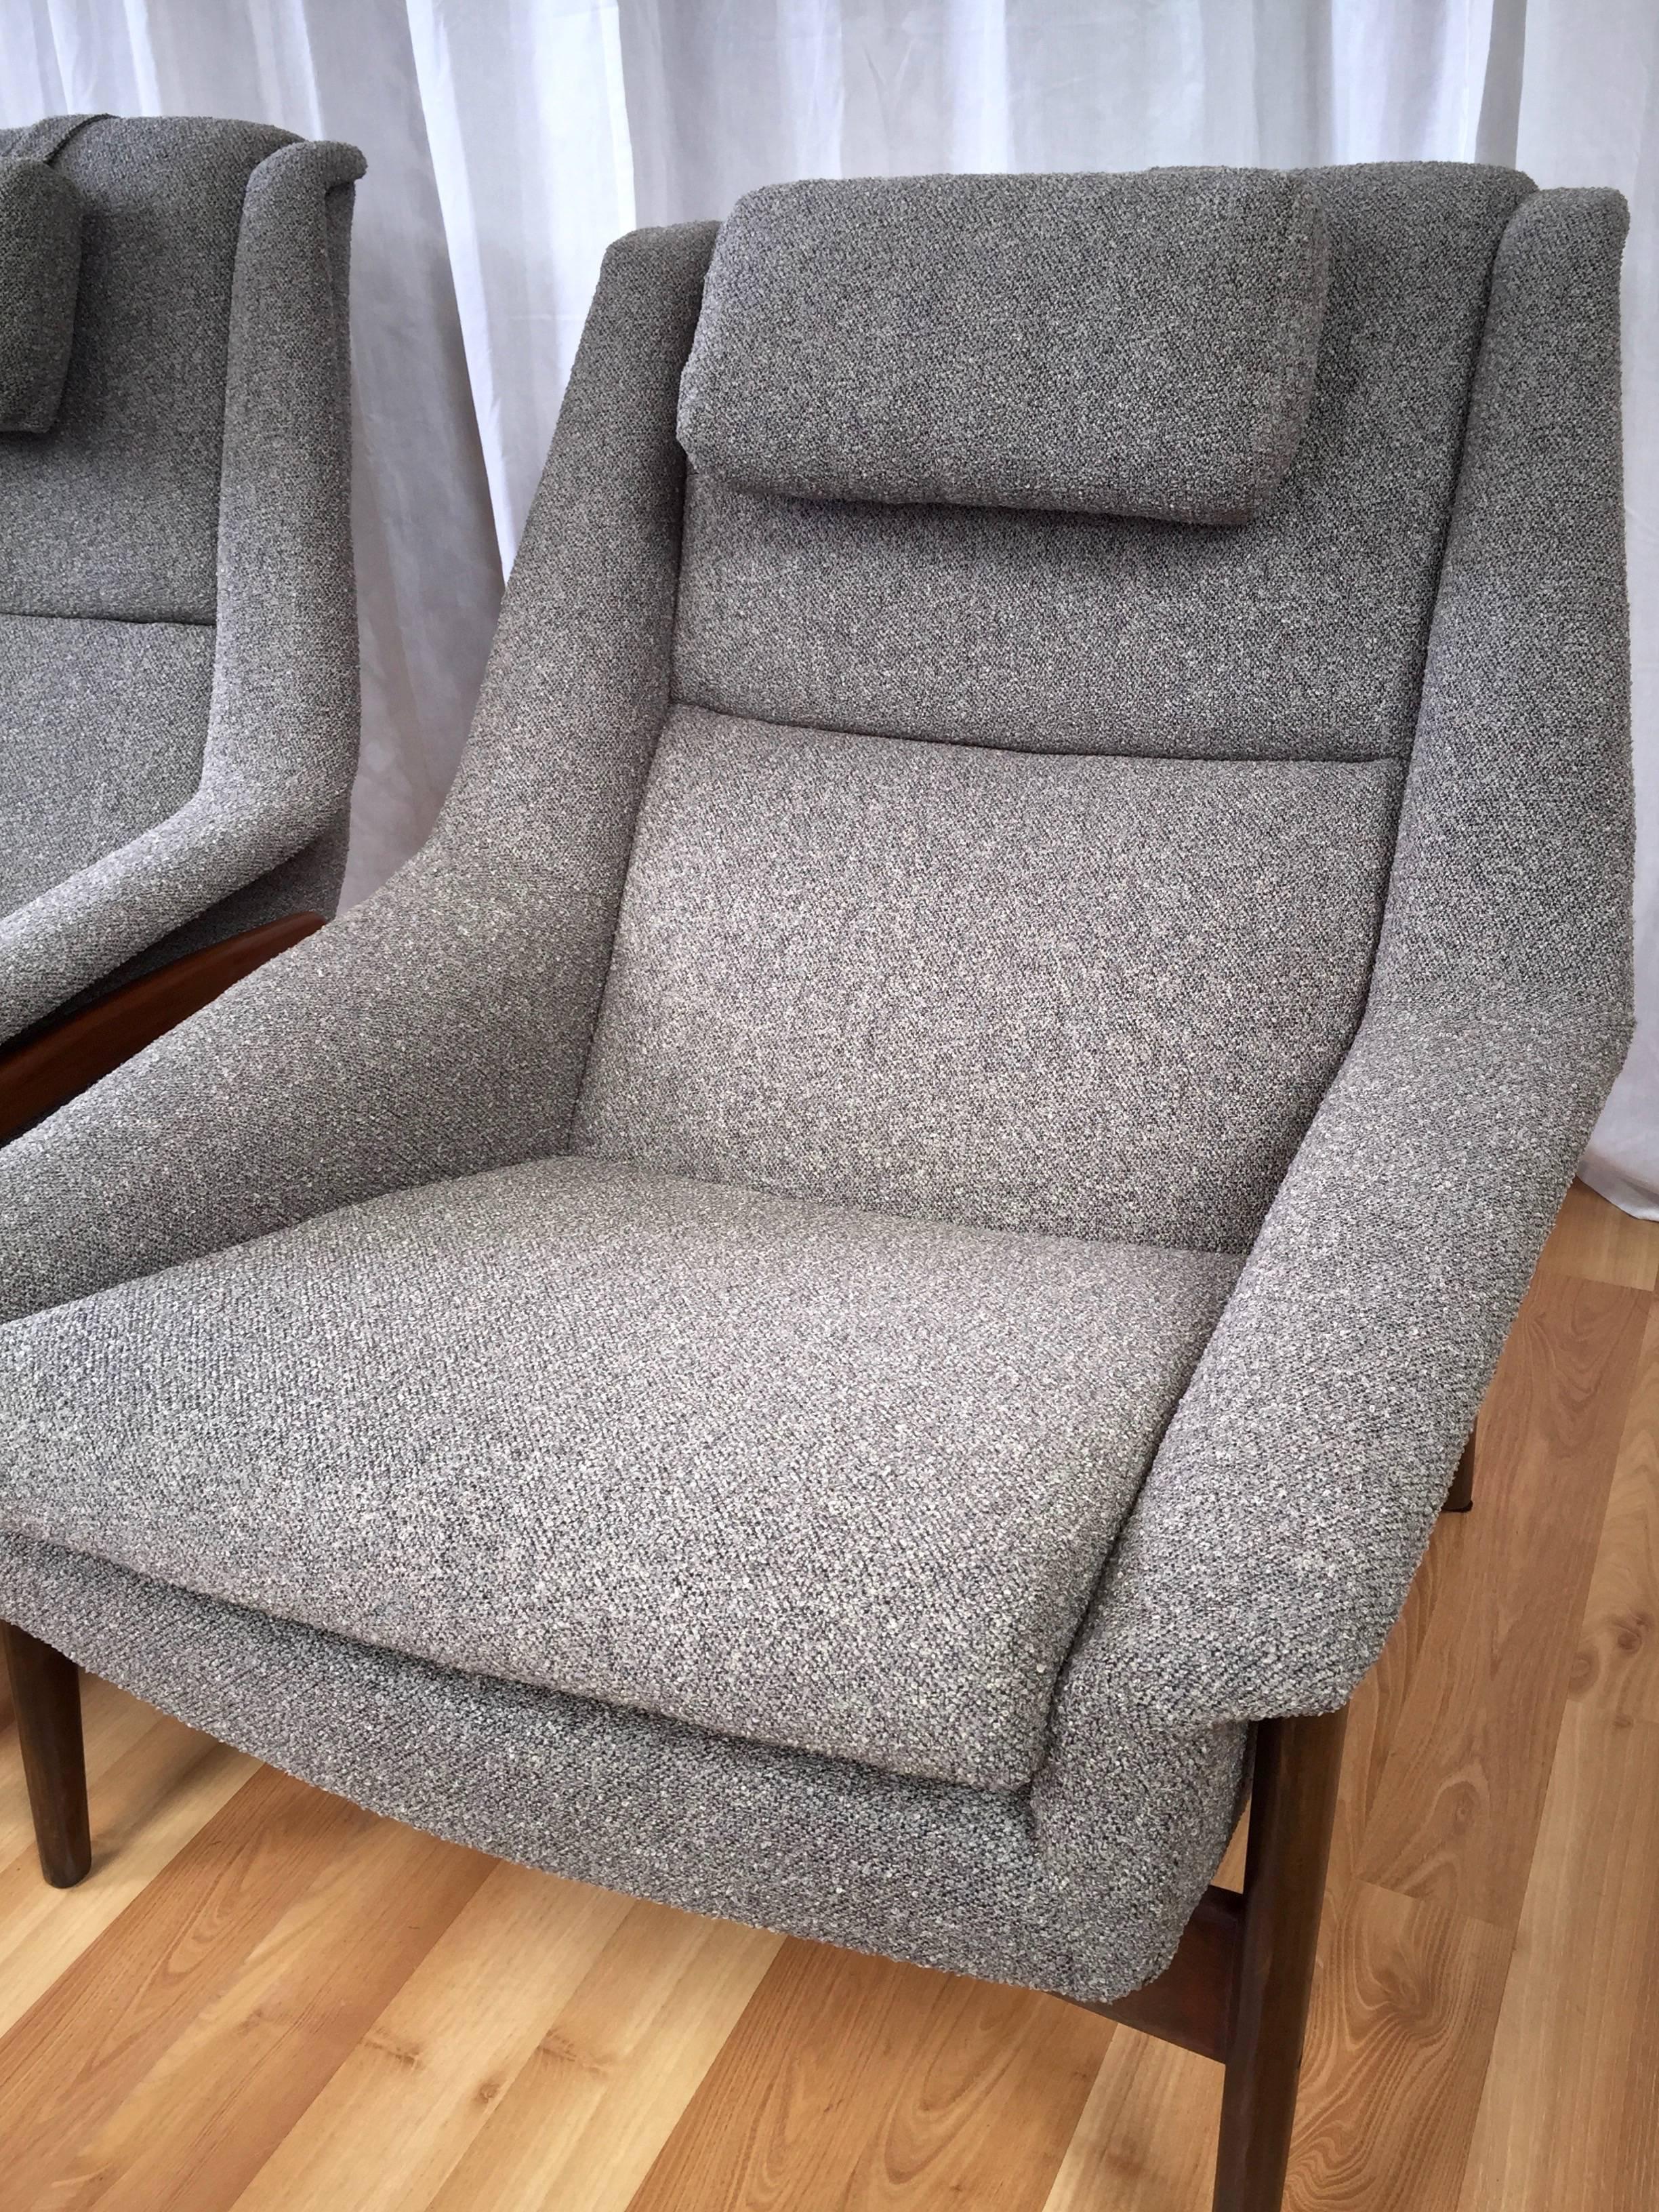 3 Piece Set of Folke Ohlsson for DUX Lounge Chairs and Ottoman *SATURDAY SALE In Good Condition In San Francisco, CA